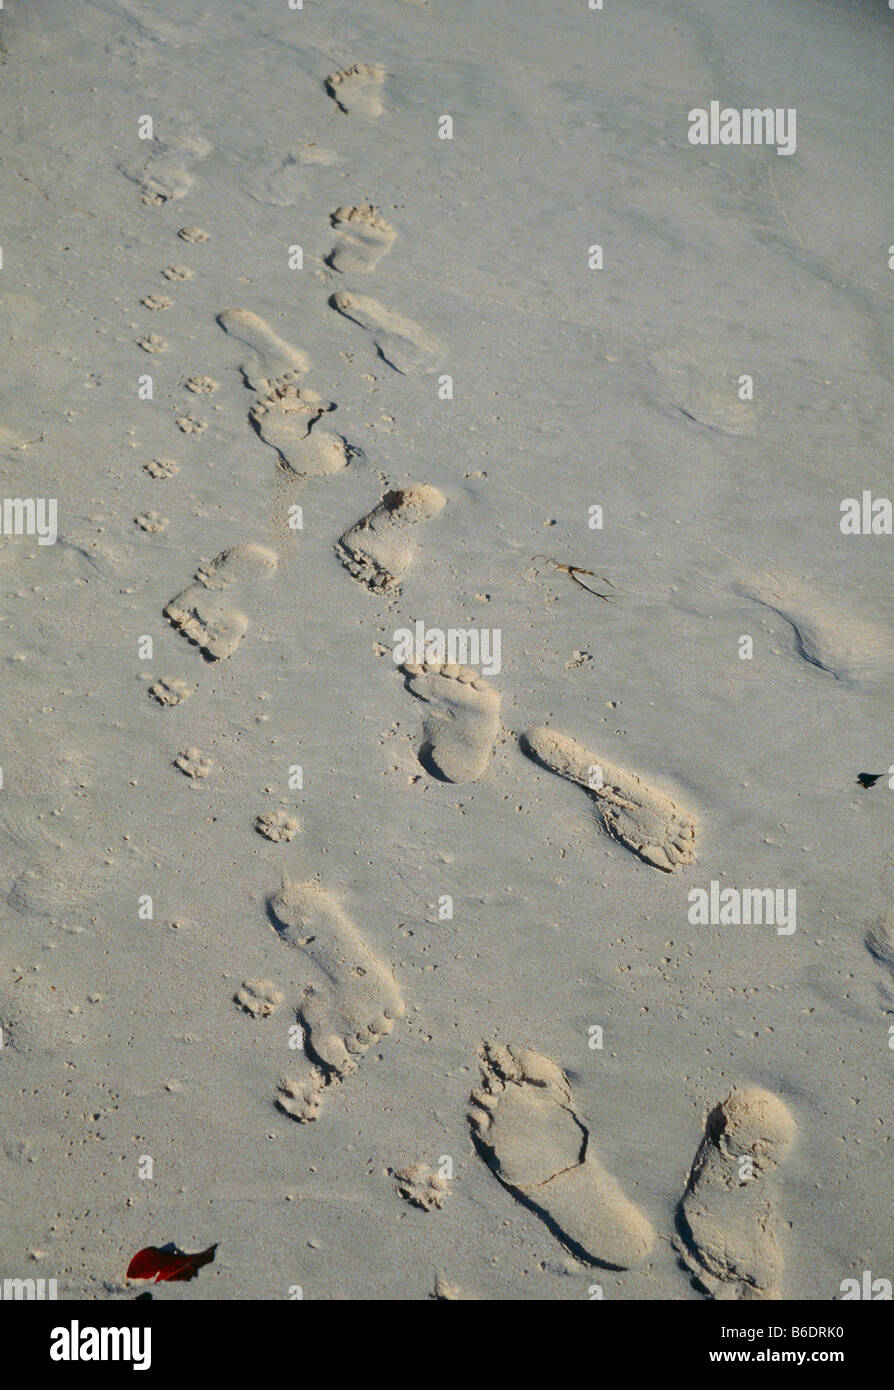 Footprints. Human and dog footprints in sand on a beach. Photographed in Barbados. Stock Photo